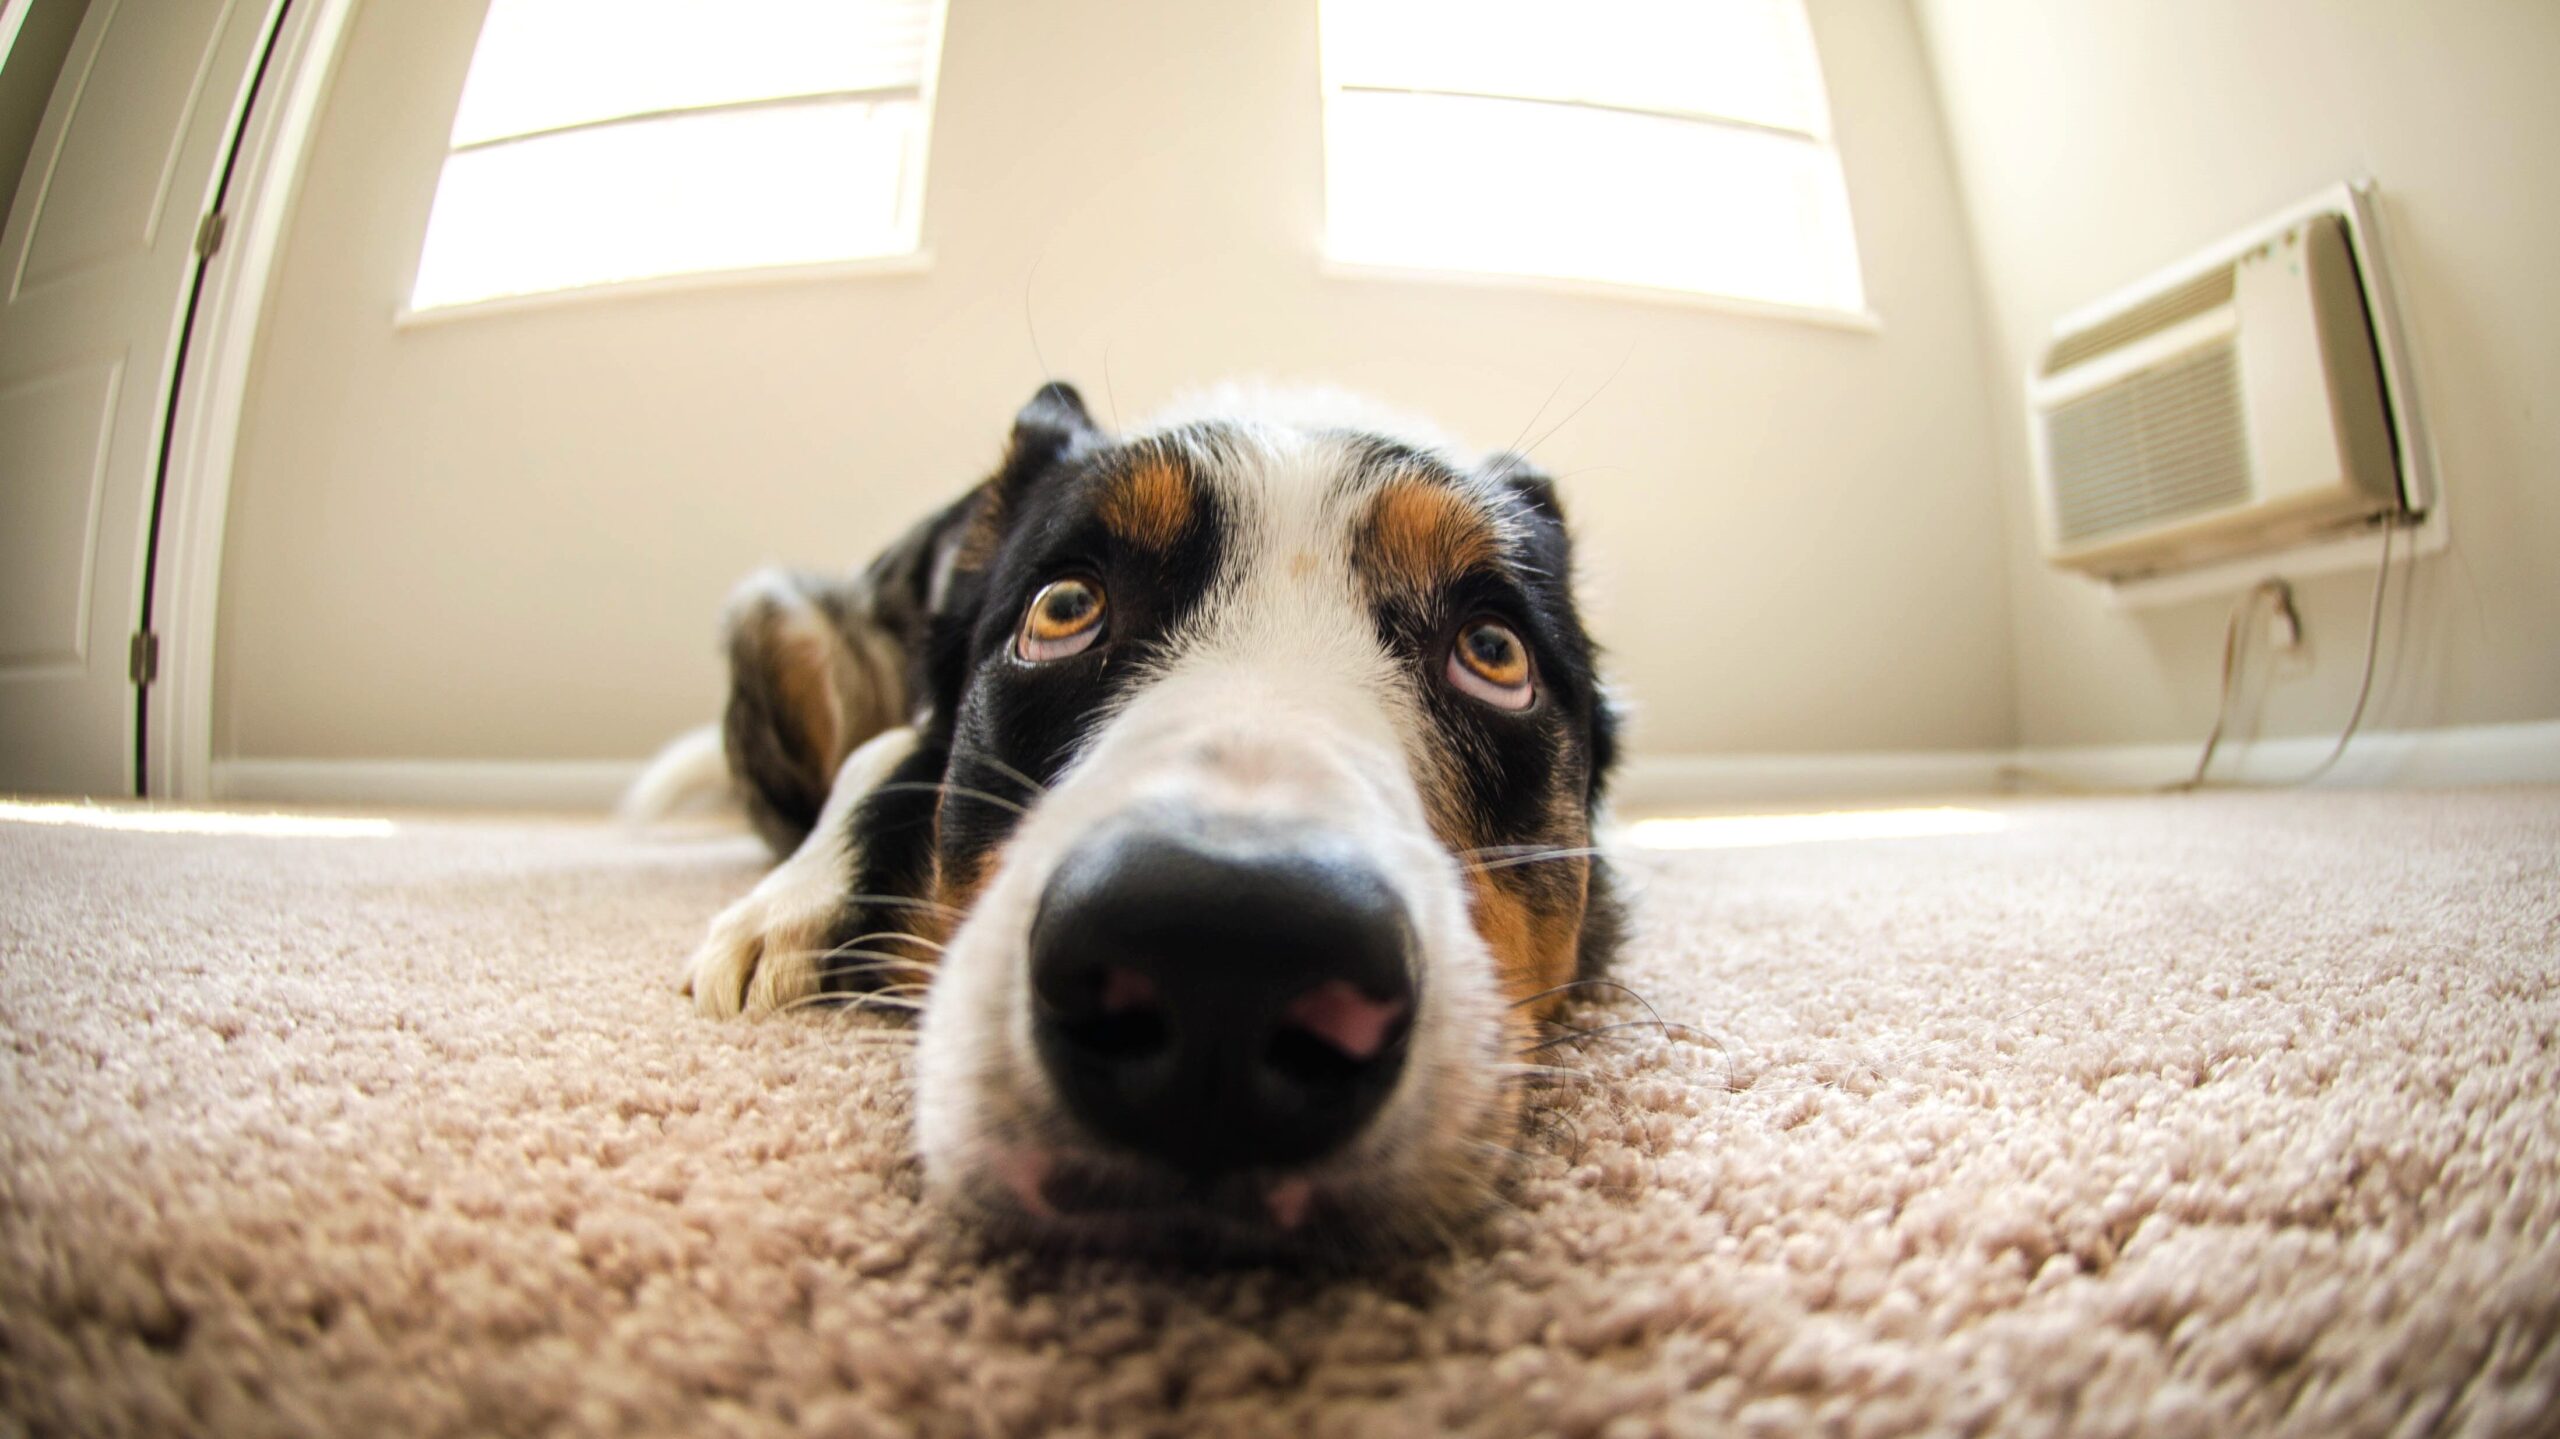 Guilty looking dog looks up from his place on the carpet.  He must realize he's the main reason his family has to pay to have their carpet cleaned.